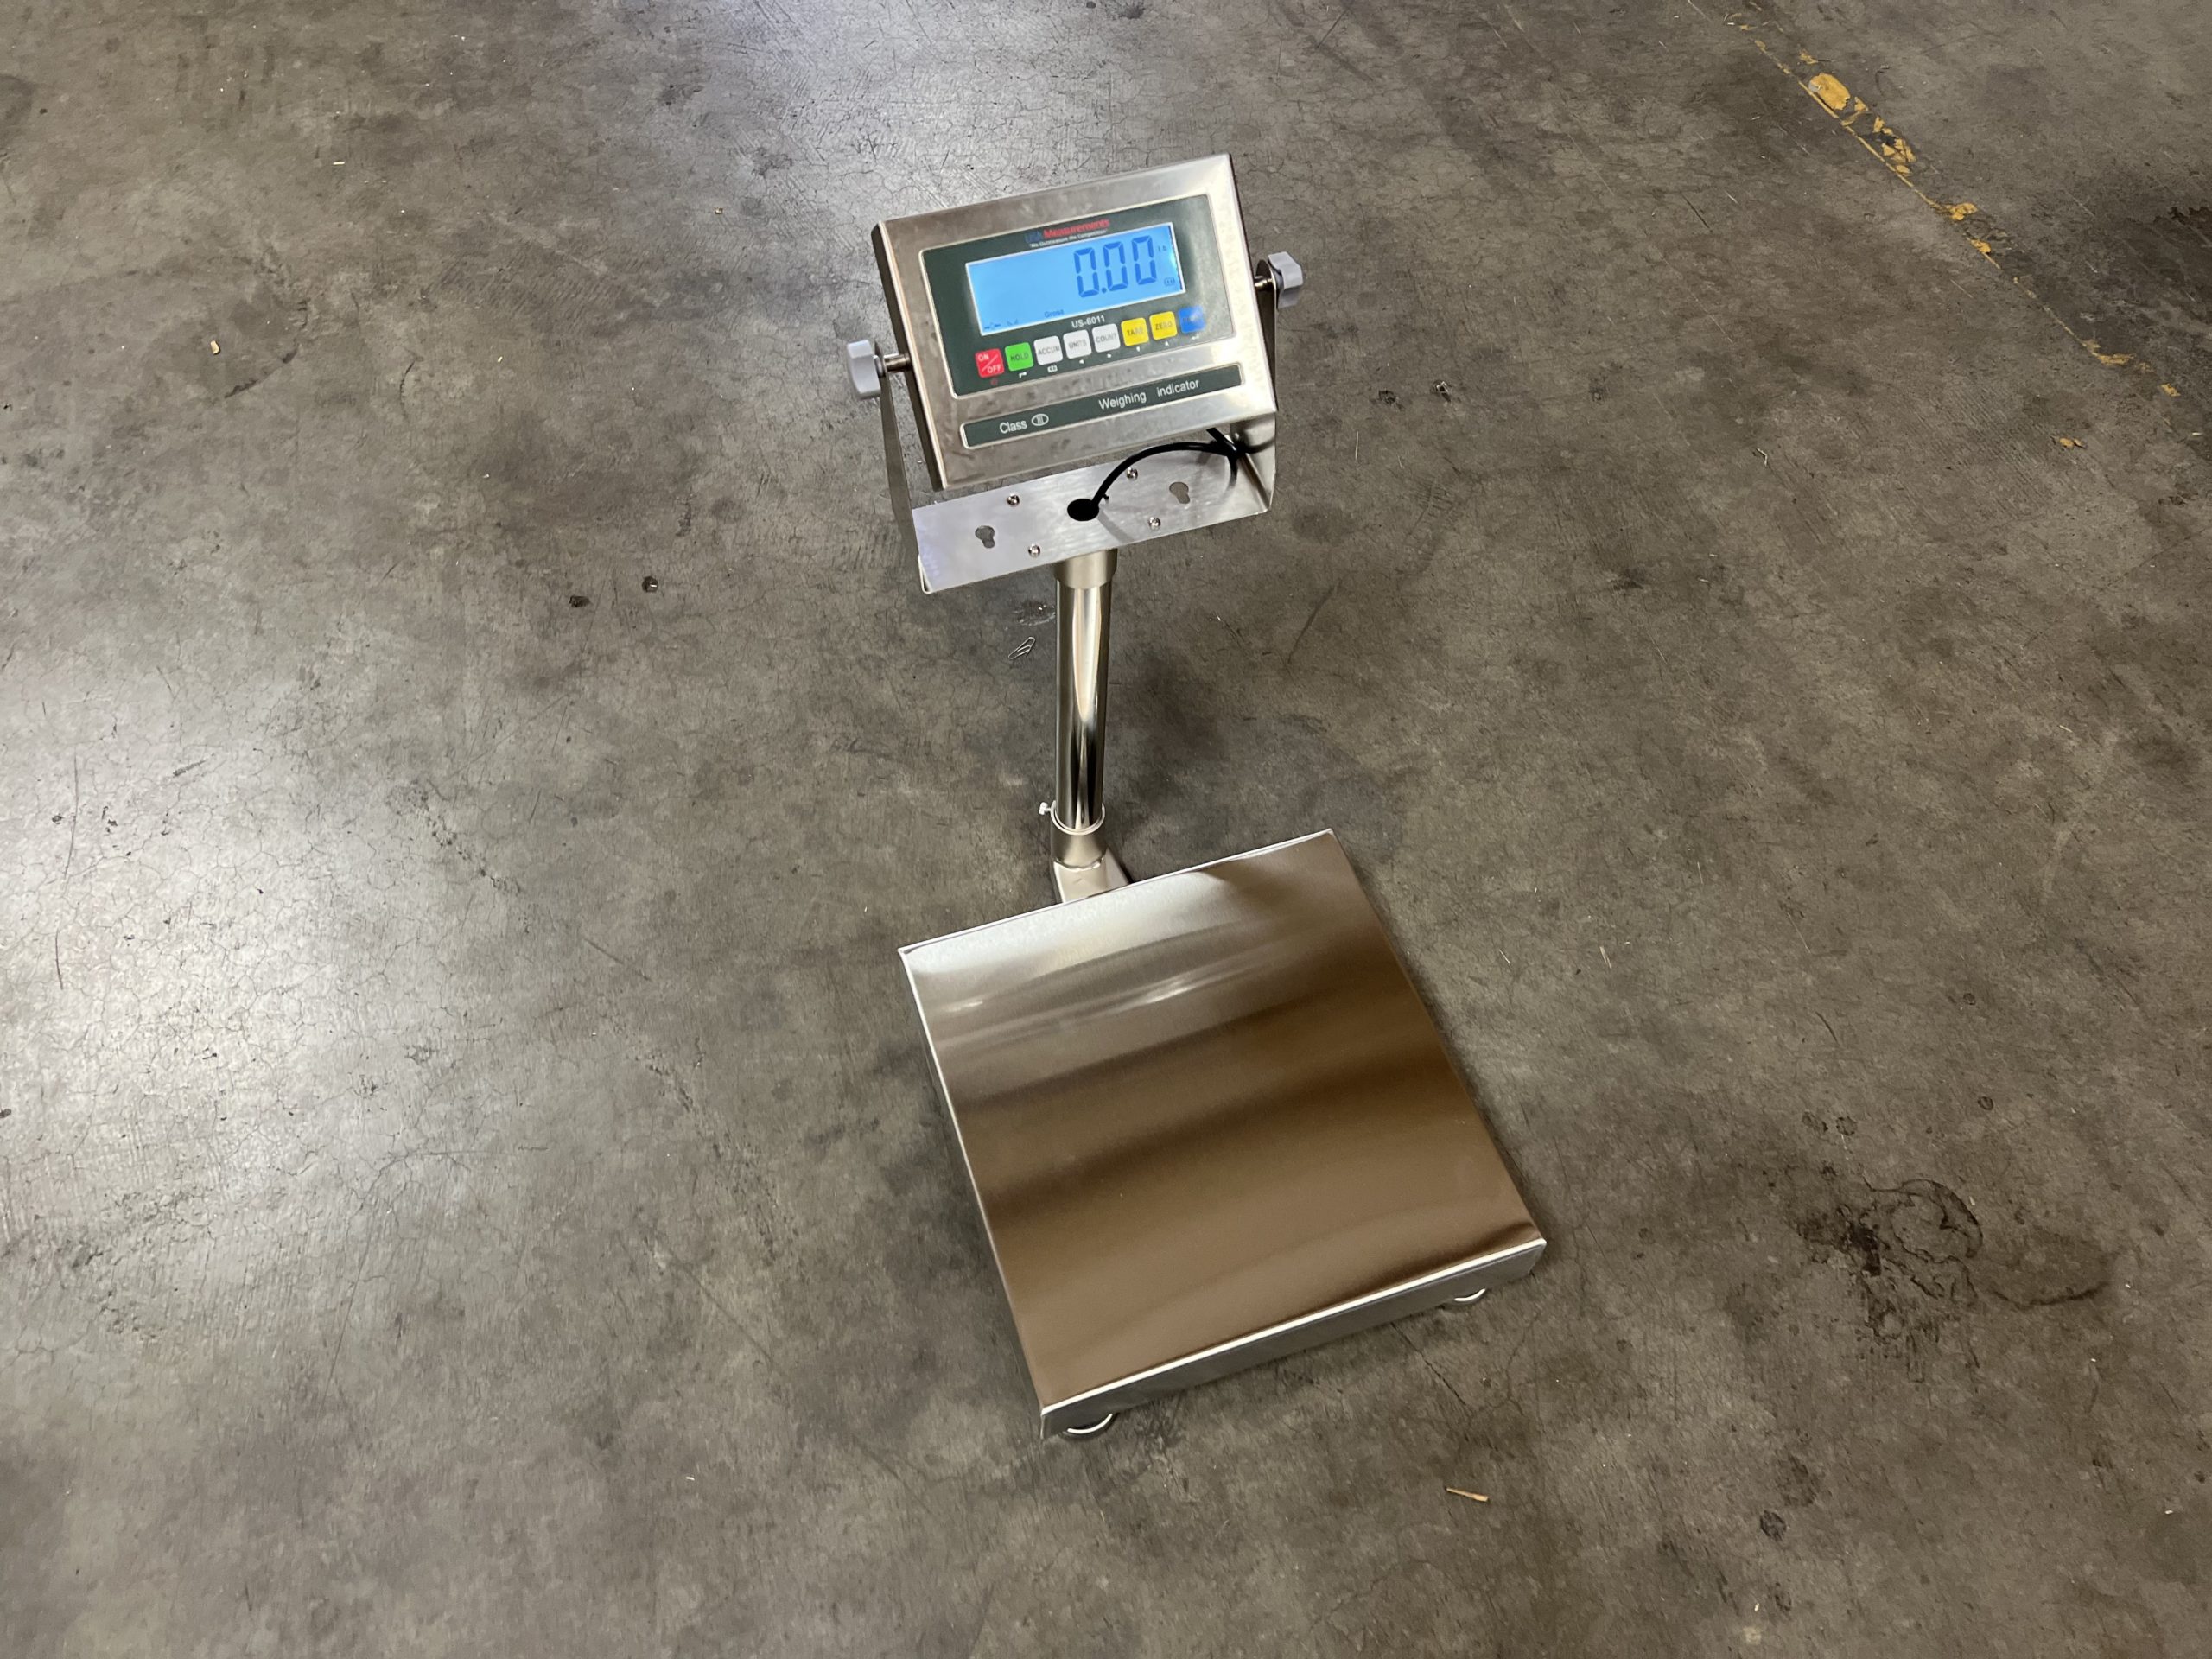 Intelligent Weighing Technology TitanH 500-24 Bench Scale, 500 lb x 0.1 lb,  NTEP, Class III